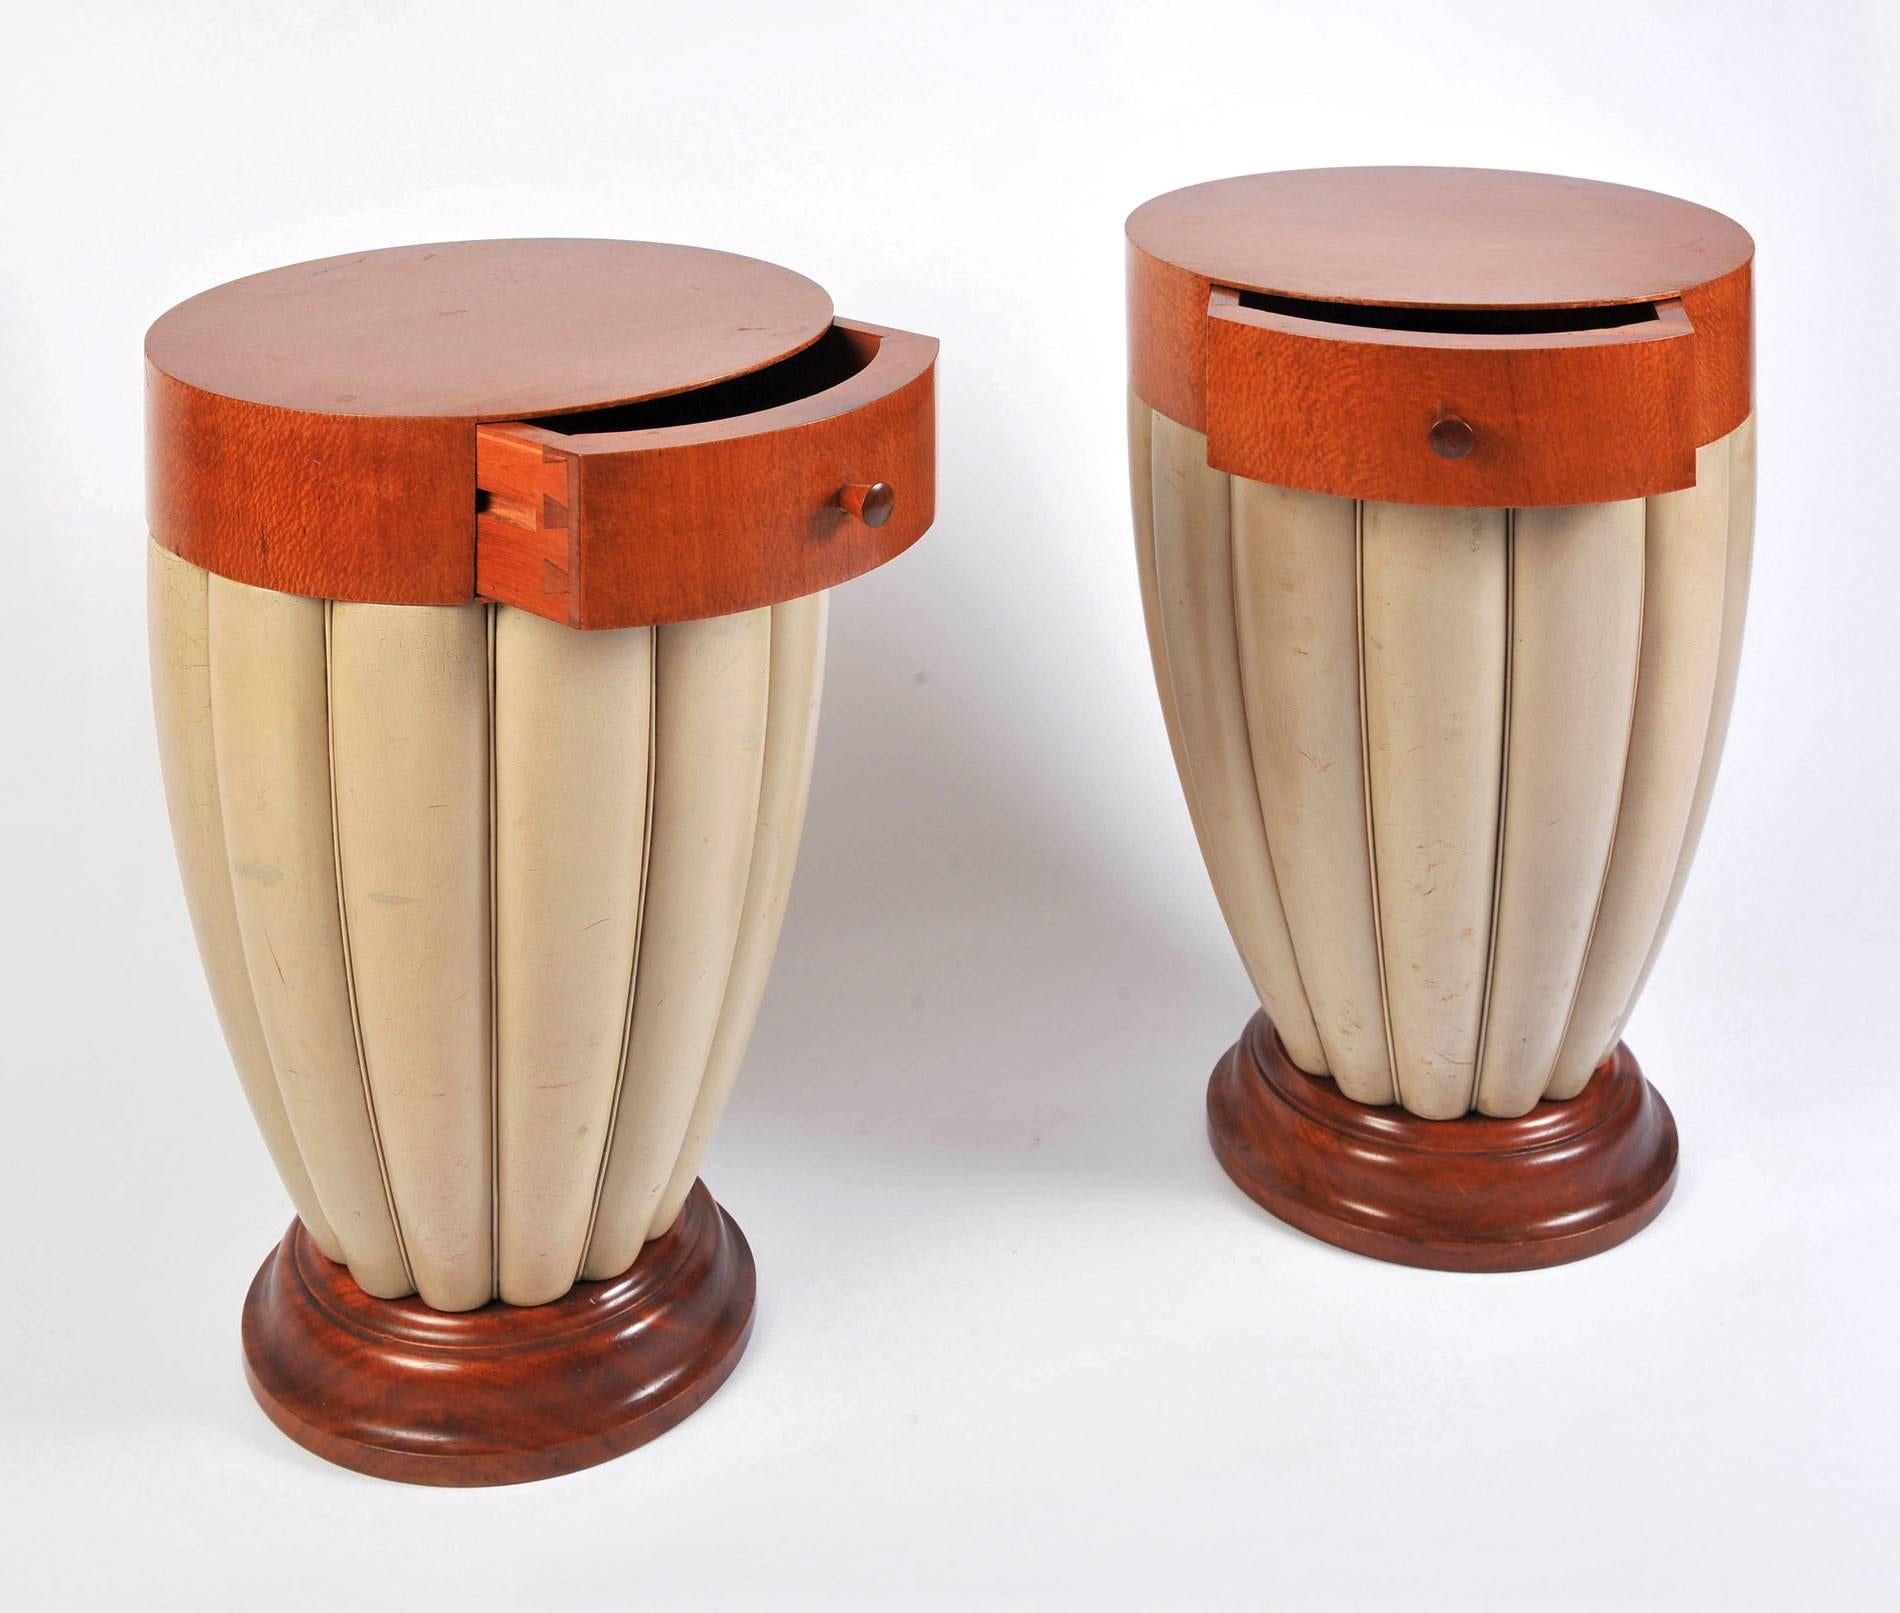 A pair of Art Deco side tables or nightstands in silky oak and off-white calf leather, dating from the mid-1920s. The fine quality of design and production could only have been conceived by a premier designer in 1920s, Paris. Interior markings